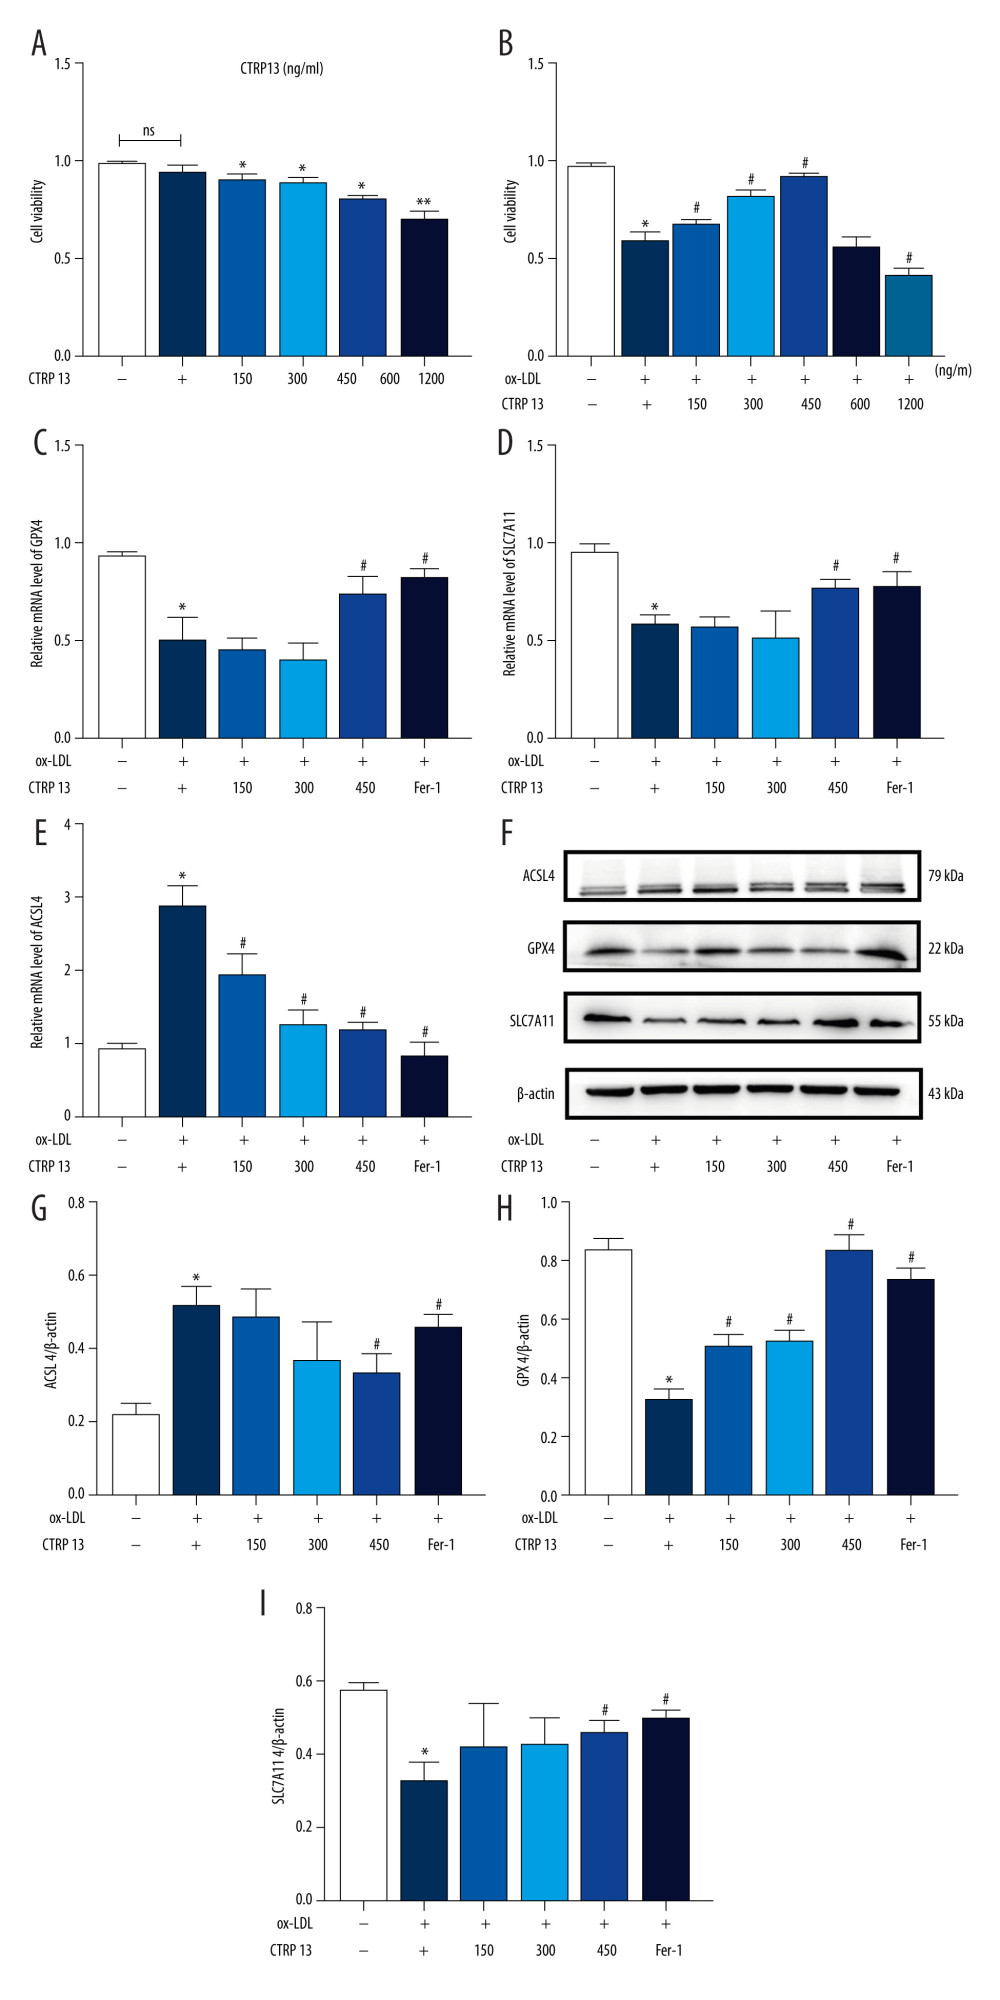 C1q/tumor necrosis factor-related protein 13 (CTRP13) suppressed oxidized low-density lipoprotein (ox-LDL)-induced human umbilical vein endothelial cell (HUVEC) ferroptosis. (A) Quantification of HUVEC viability following different doses of CTRP13 treatment. (B) Quantification of HUVEC viability following different doses of CTRP13 treatment following co-incubation with or without ox-LDL 100 μg/mL. (C–E) Acyl-CoA synthetase long-chain family member 4 (ACSL4), glutathione peroxidase 4 (GPX4), and recombinant solute carrier family 7, member 11 (SLC7A11) mRNA expressions. (F) Protein expression levels were measured using Western blot analysis. The following groups were assessed: Control; ox-LDL; ox-LDL+CTRP13150 ng/mL; ox-LDL+CTRP13 300 ng/mL; ox-LDL+CTRP13 450 ng/mL); ox-LDL+Fer-1, HUVECs were pre-treated with ox-LDL 100 μg/mL. (G–I) Quantitative analysis of ferroptosis-associated protein expression. The data are expressed as the mean±SD (n=3–4 per group). Statistical power=0.953772, effect size(r)=0.858954. * P<0.05 vs the control group. # P<0.05 vs the ox-LDL group. The relative protein levels were quantified by Image J software (NIH, Bethesda, MD, USA). GraphPad Prism 9.0 software (La Jolla, USA) was used to analyze the data.